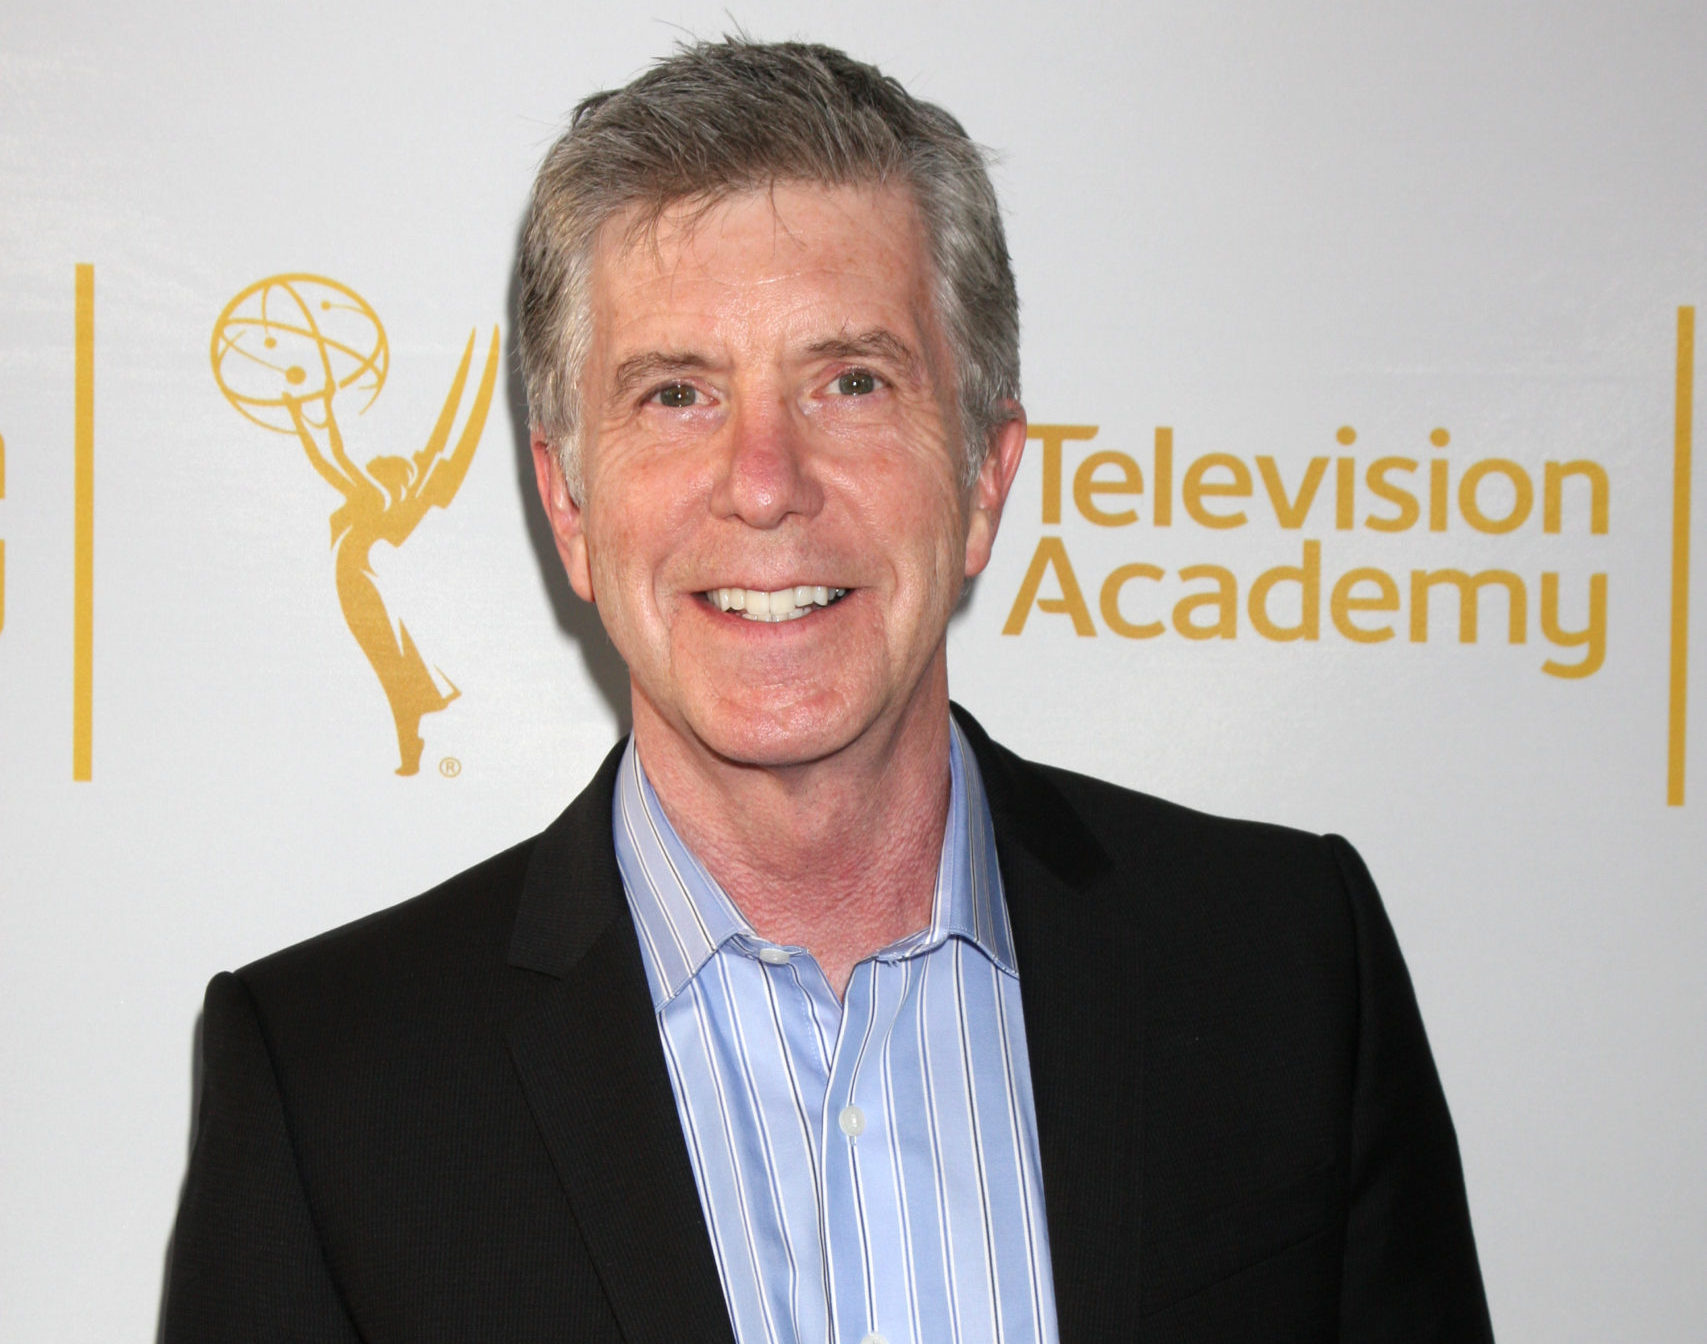 #Dancing with the Stars: Tom Bergeron Talks About Leaving the ABC Series Following “Betrayal”